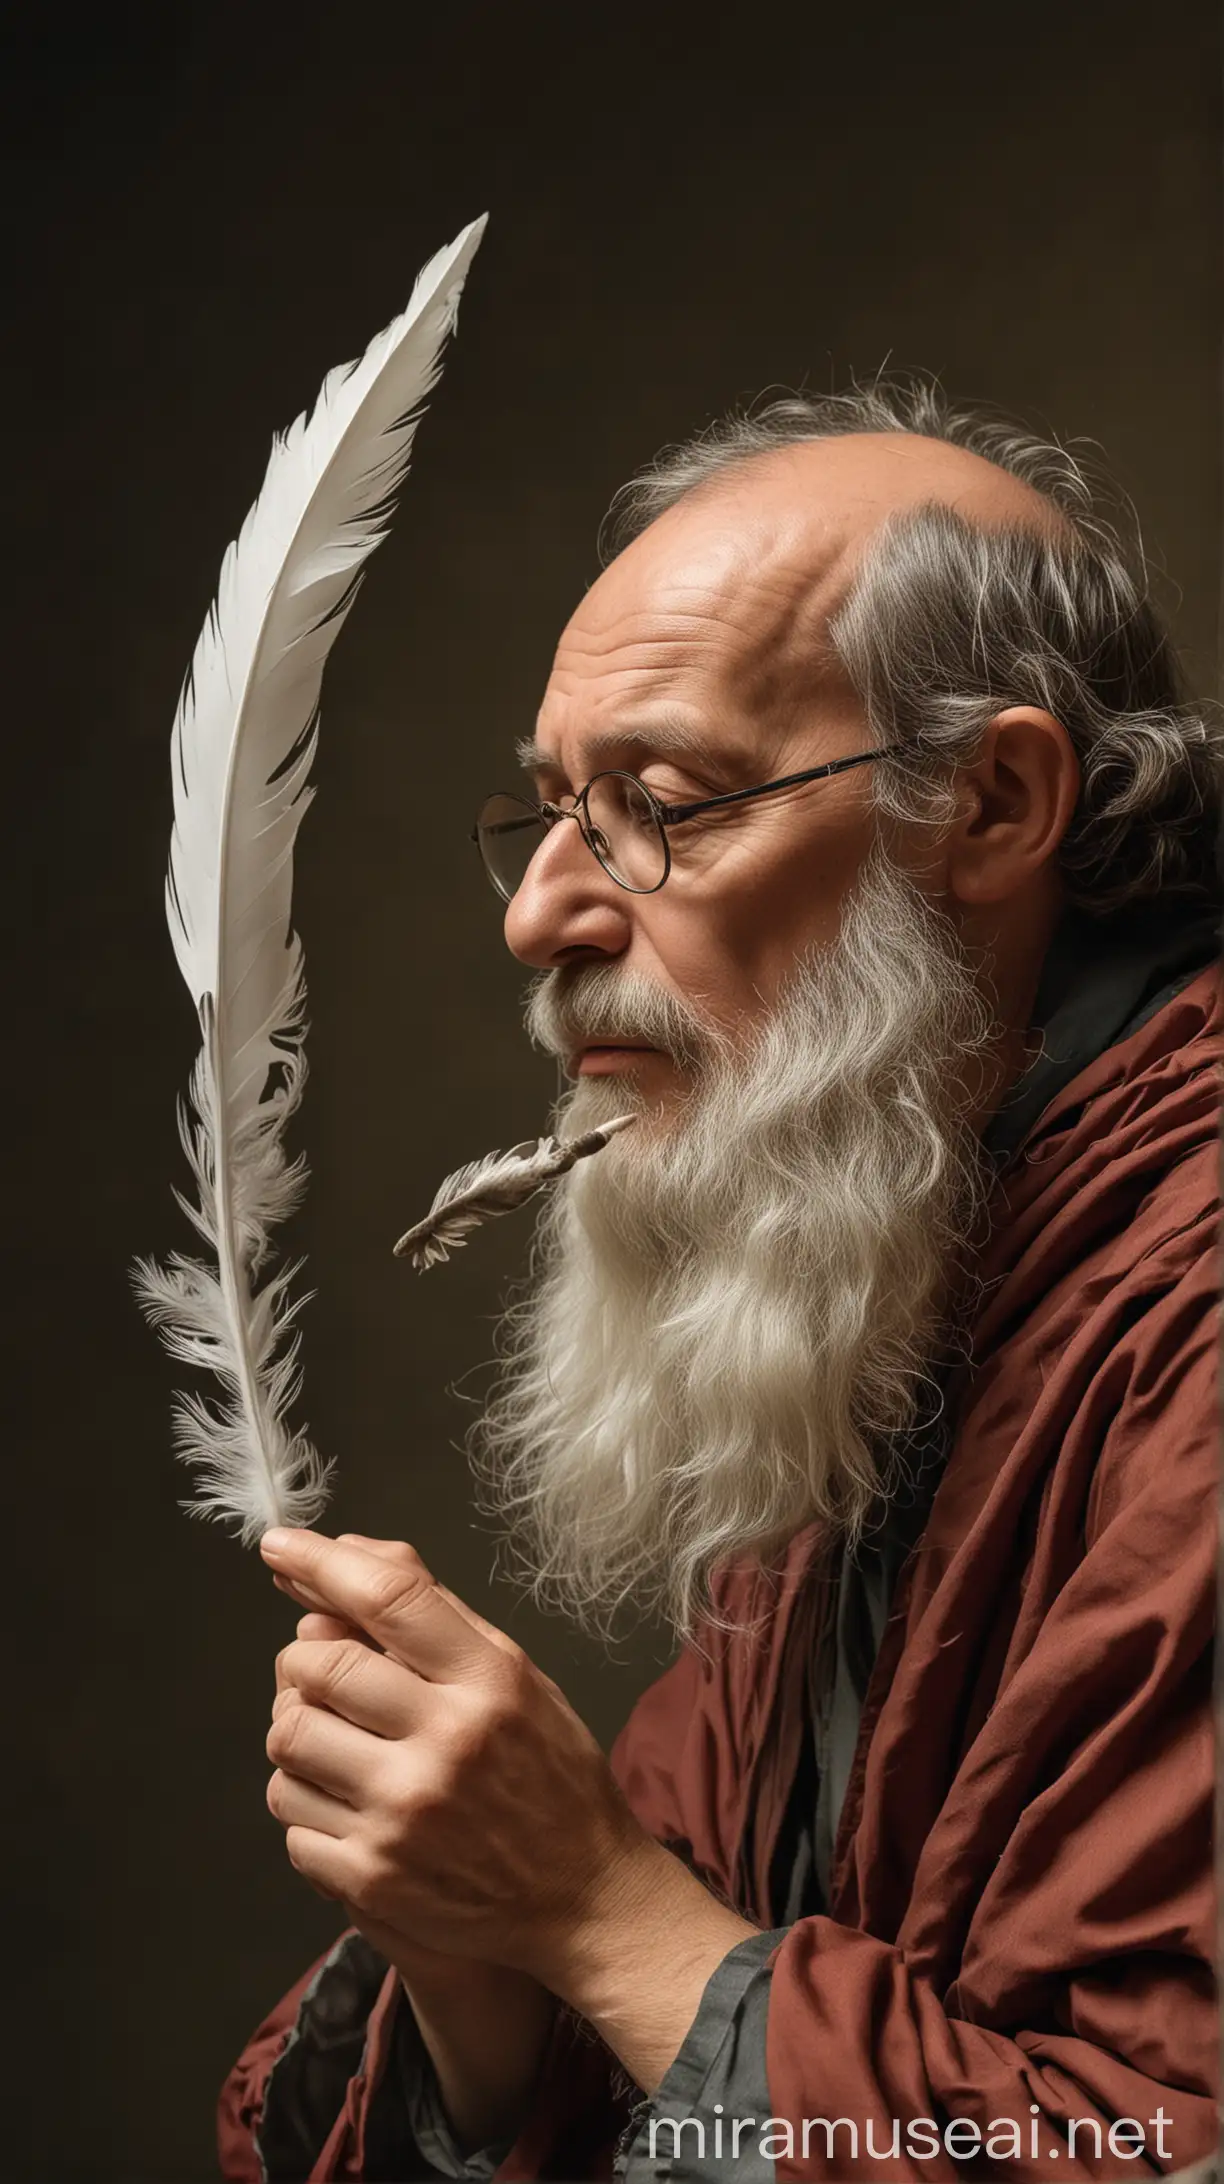 Contemplative Philosopher Blowing on Delicate Feather Artwork